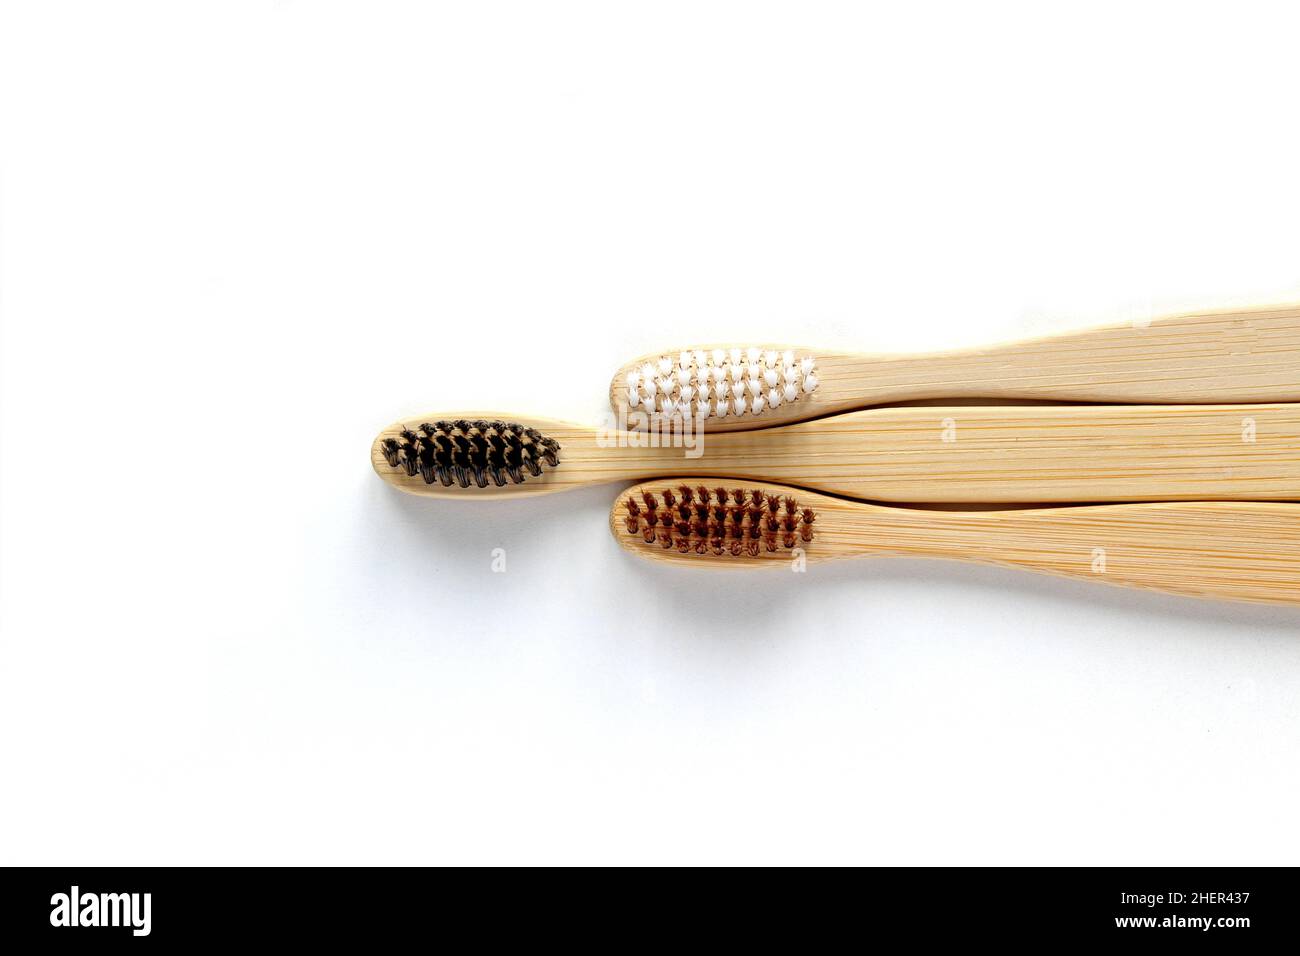 Eco-friendly bamboo toothbrushes on white background. Natural organic bathroom beauty product concept. Flat lay, top view, copy space Stock Photo